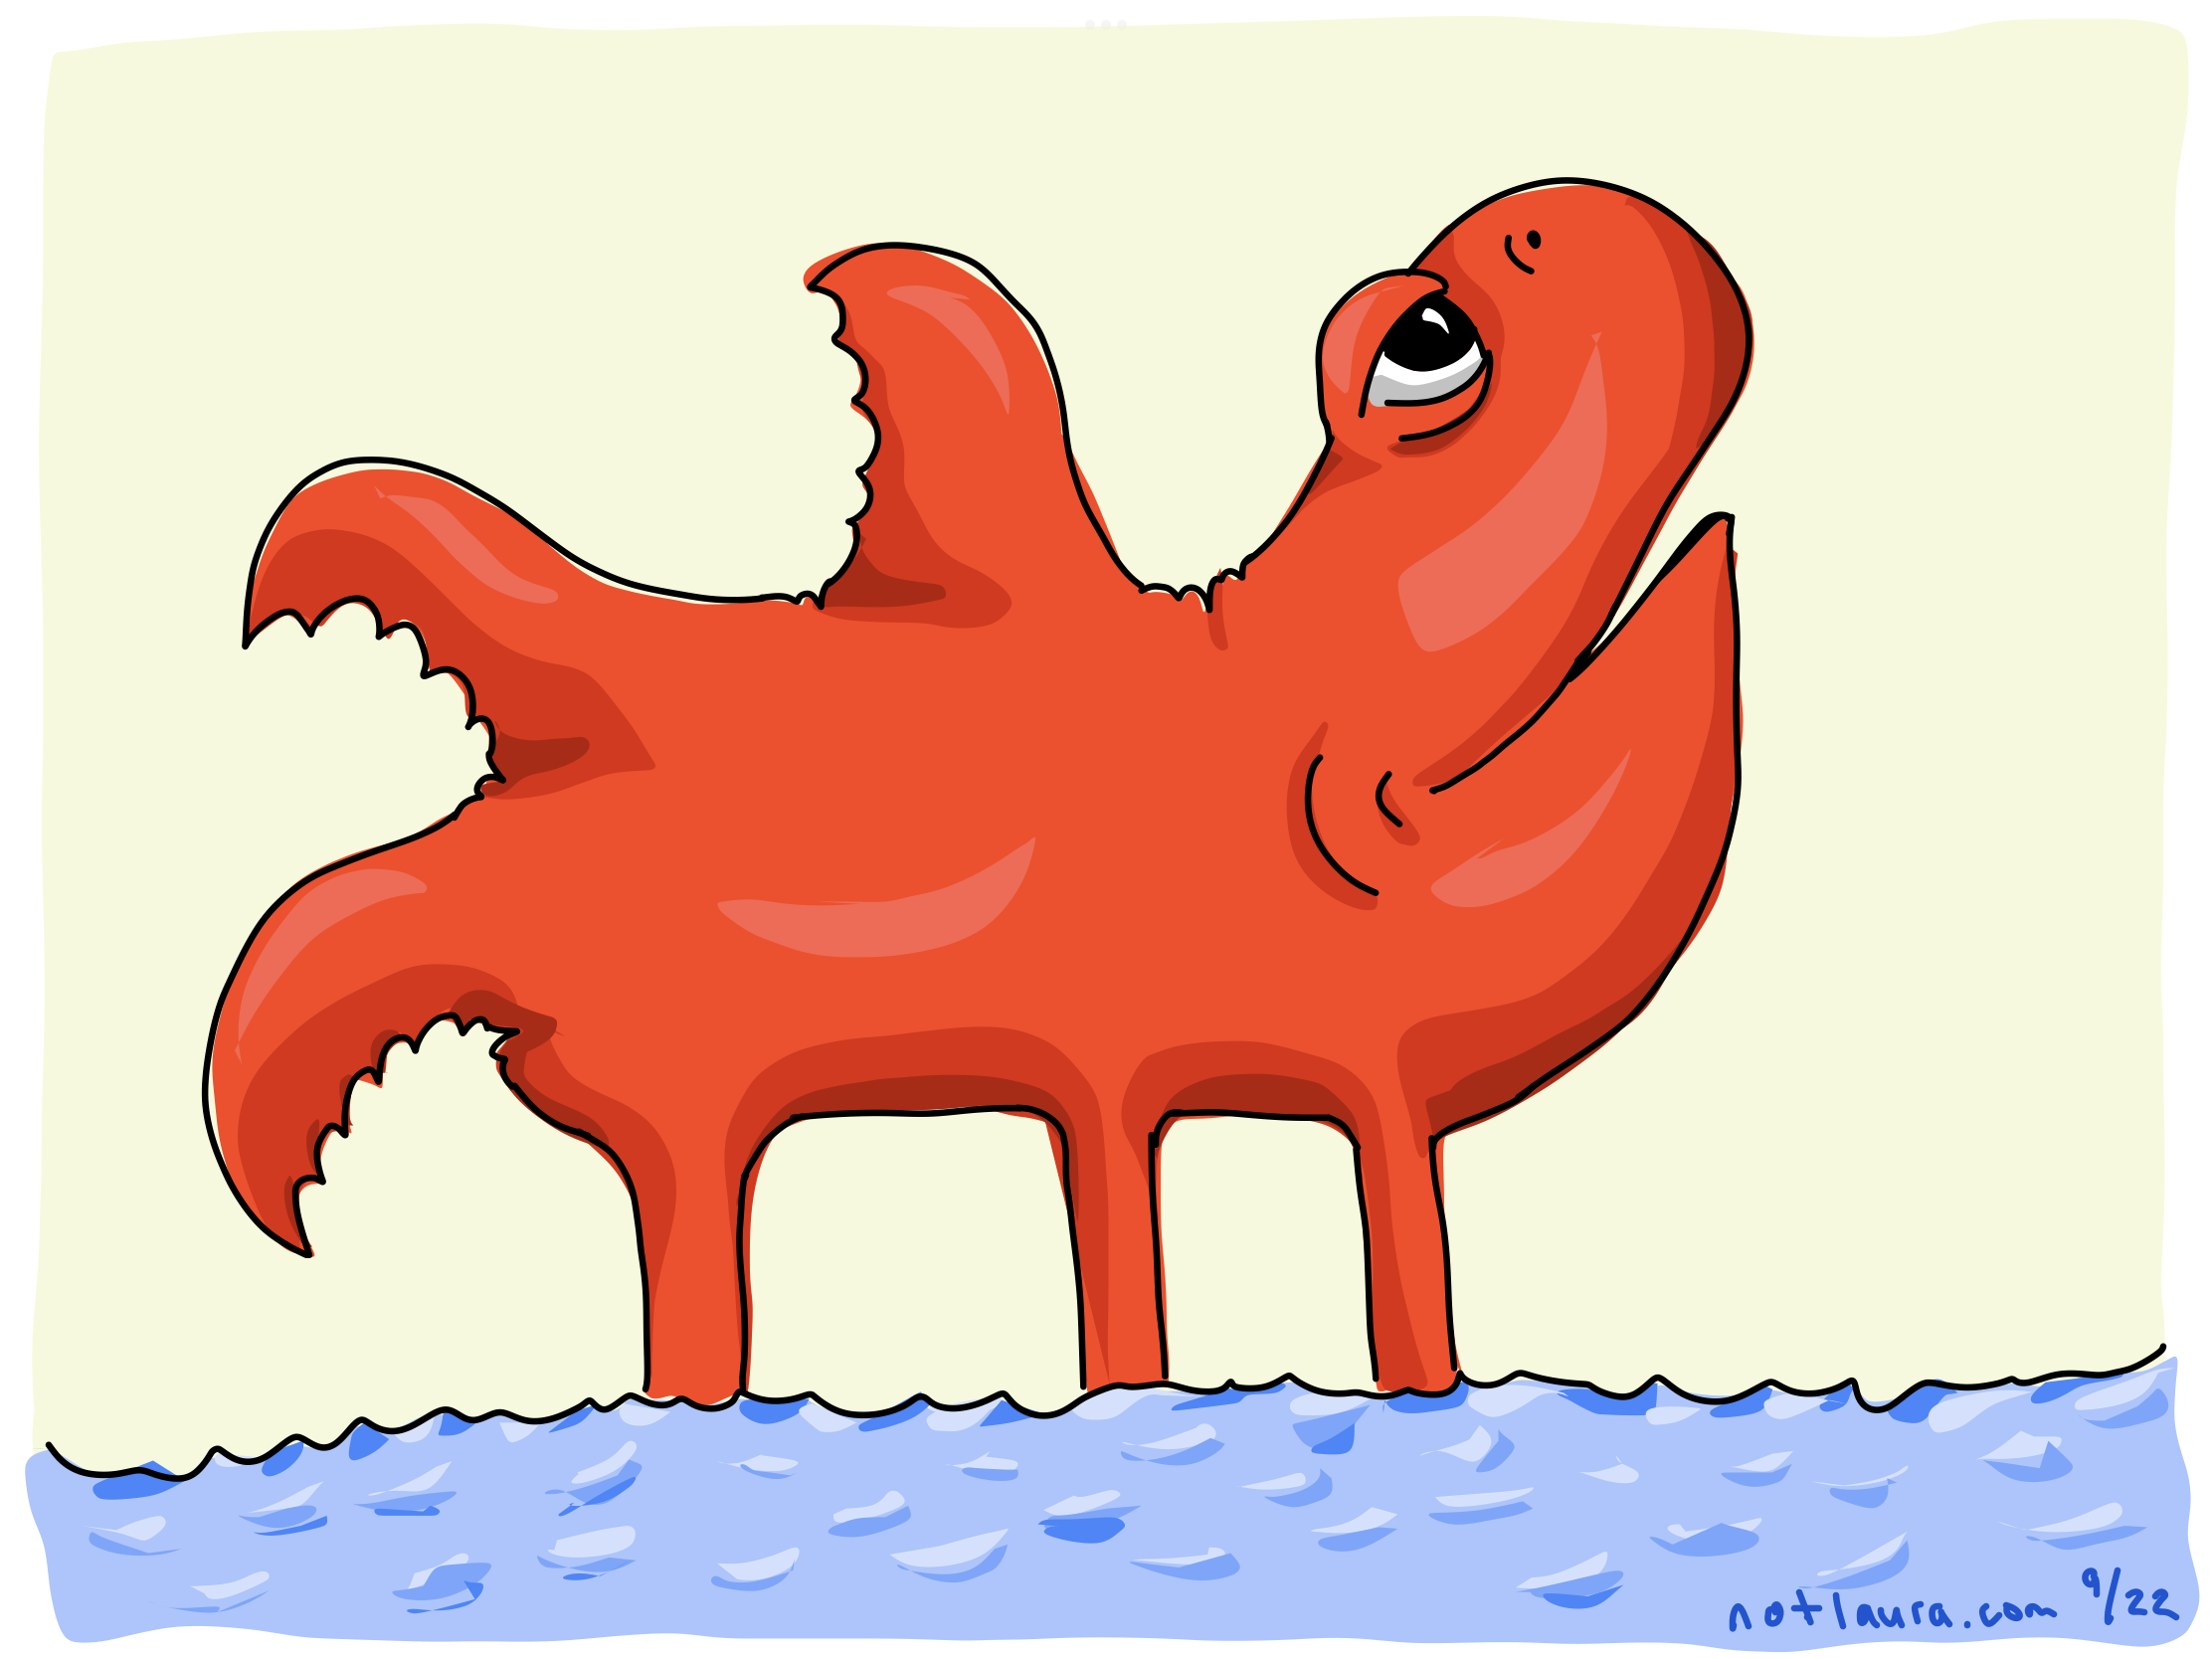 A red monster that looks a little like a whale with jagged fins and a large whale face and mouth and a kind eye. It is standing on three straight, sturdy looking legs in water.